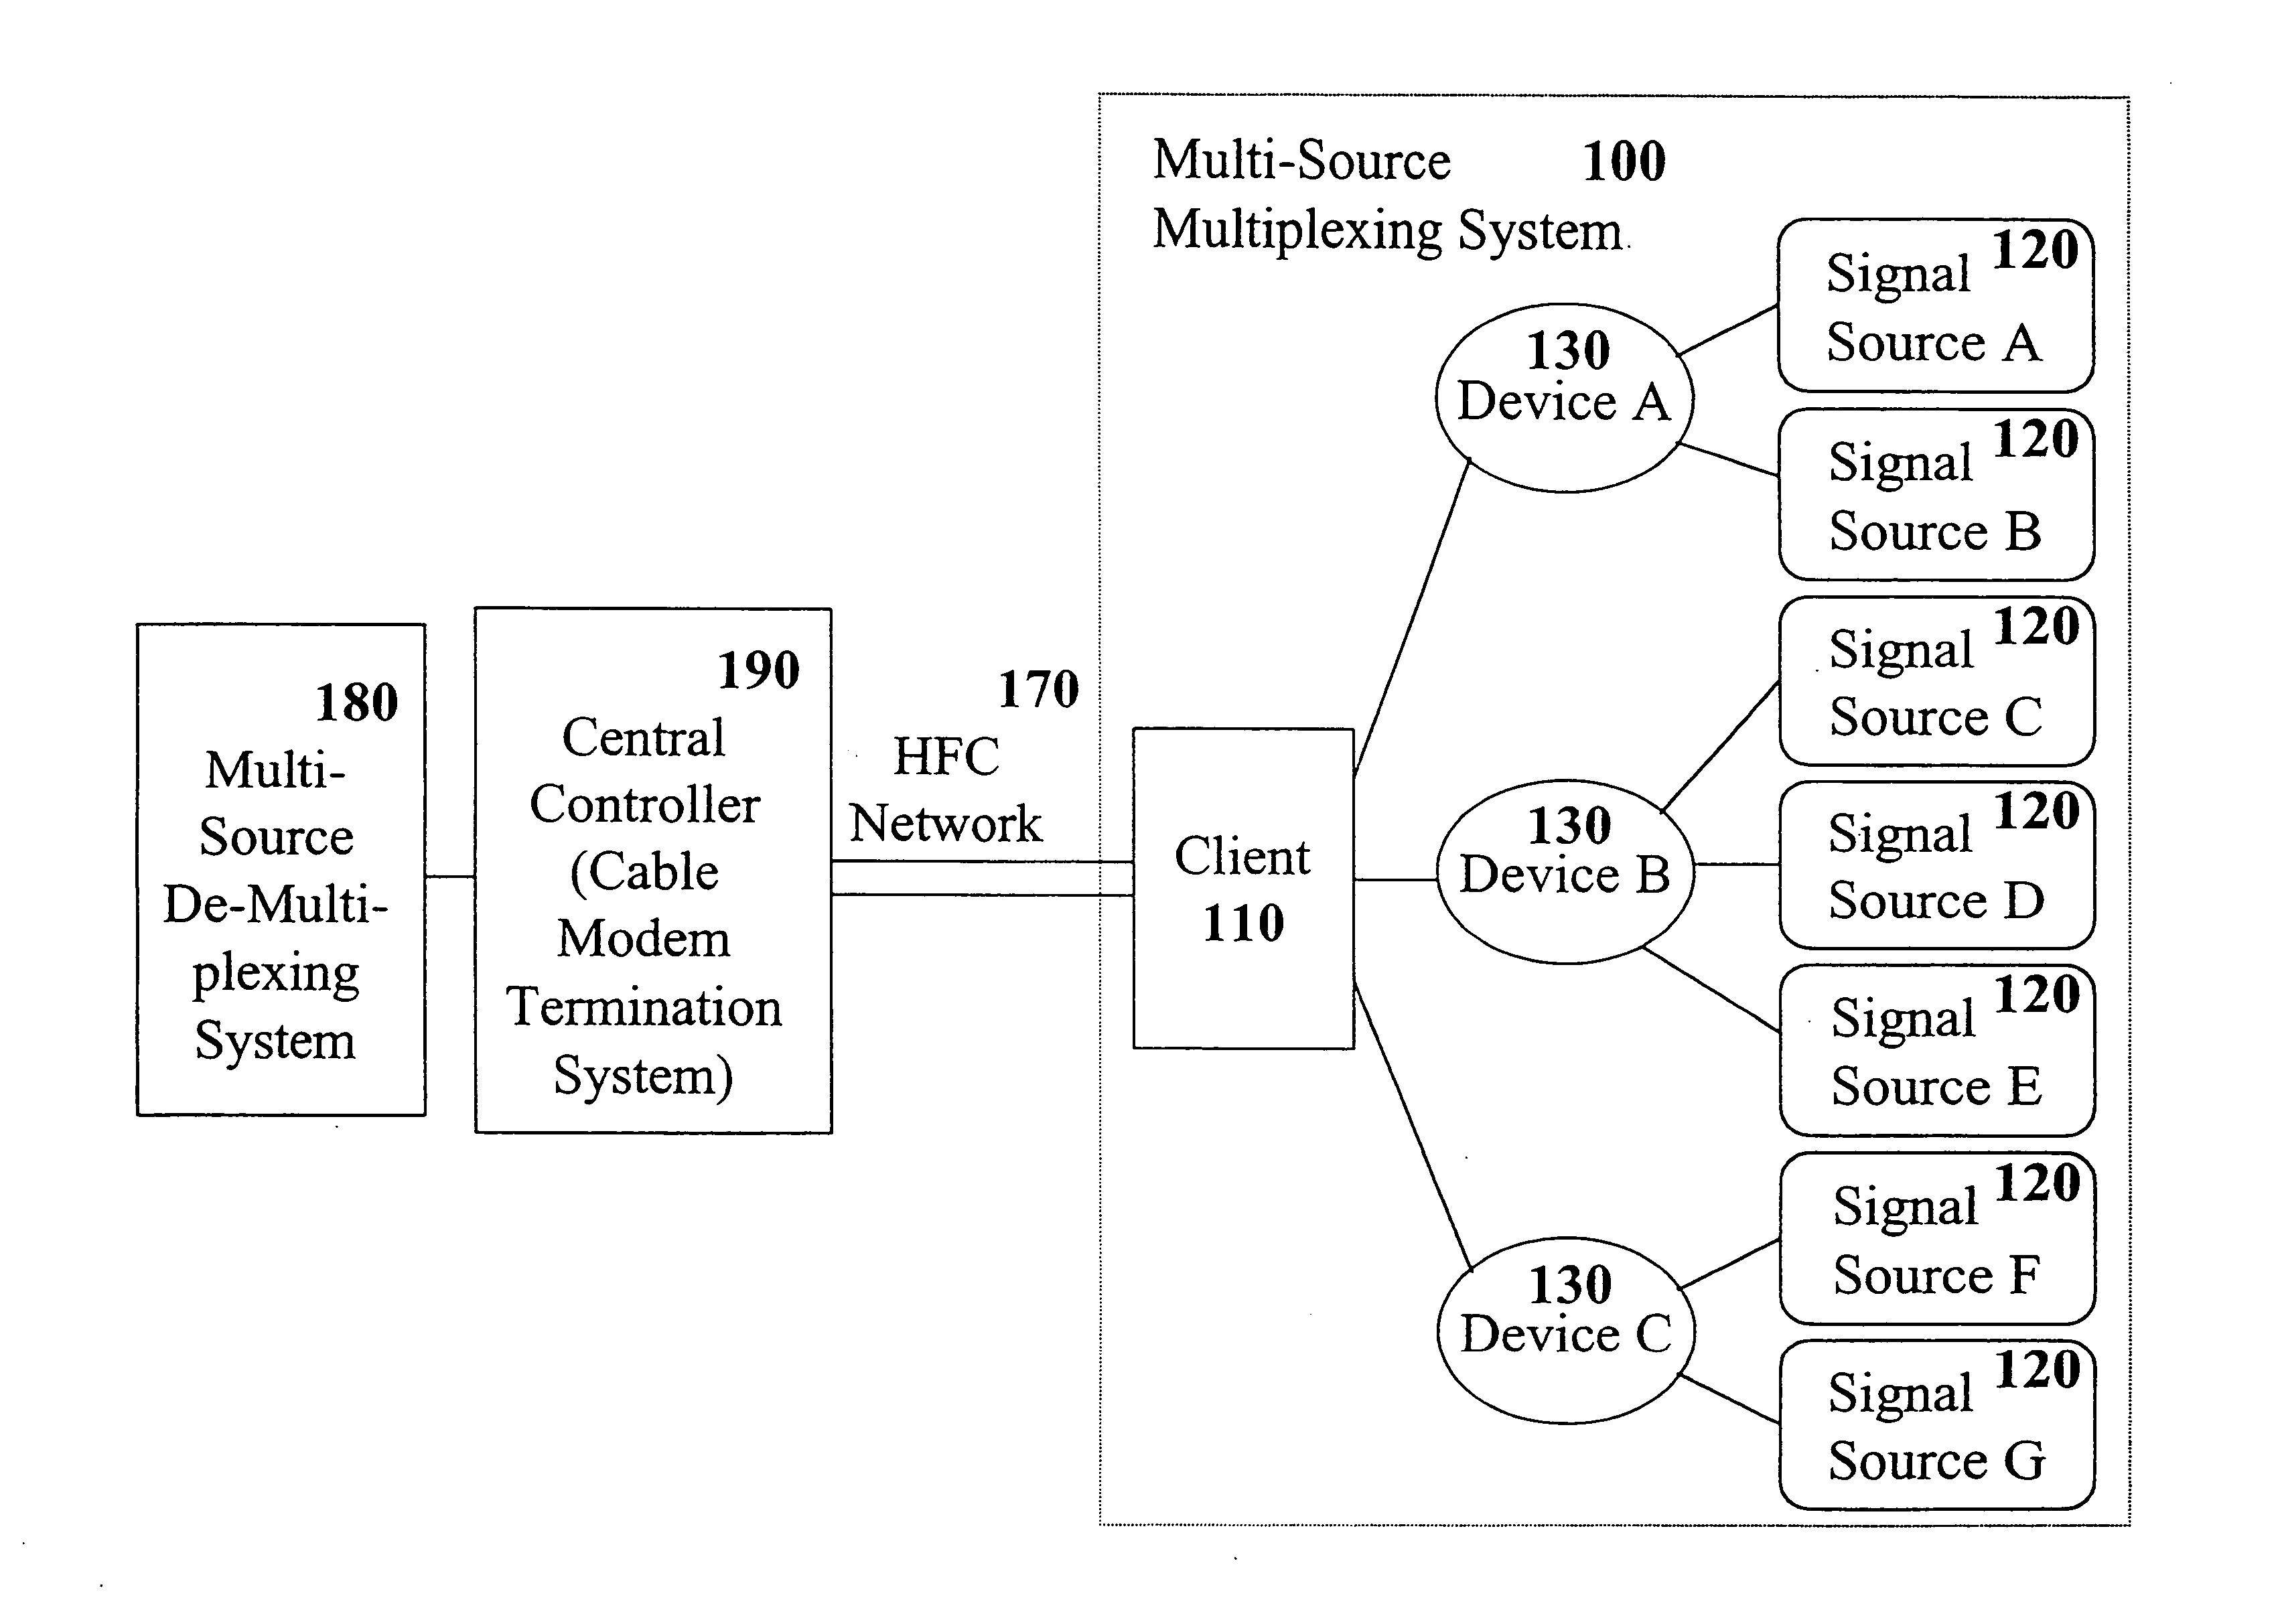 Allocation of packets in a wireless communication system